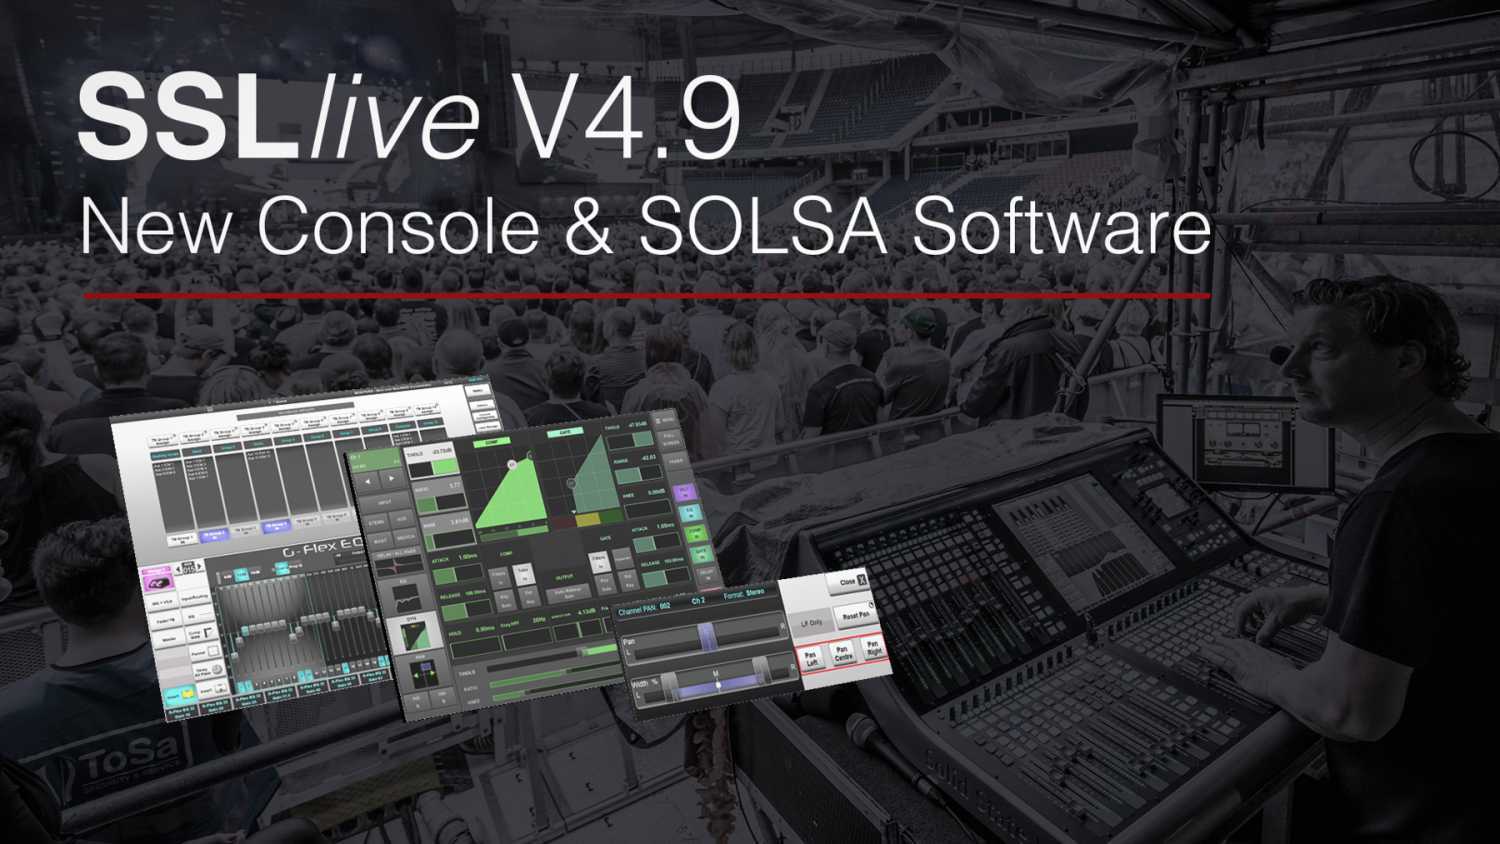 SSL will present the Live V4.9 software release at InfoComm 2019